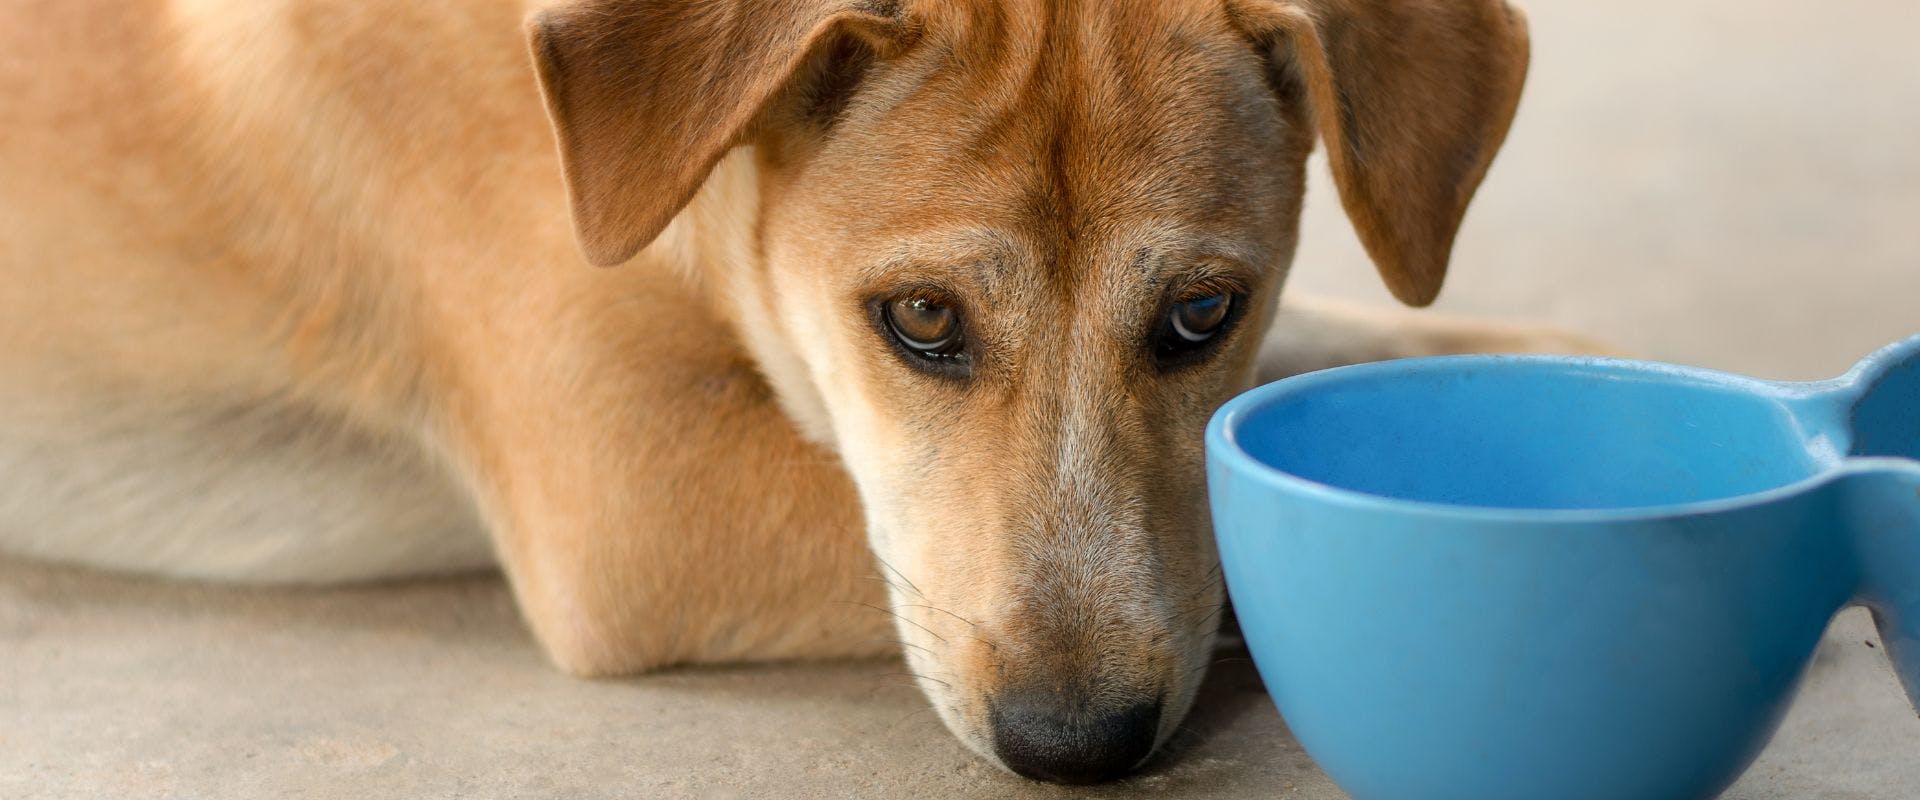 Beige dog waiting by a blue bowl for food